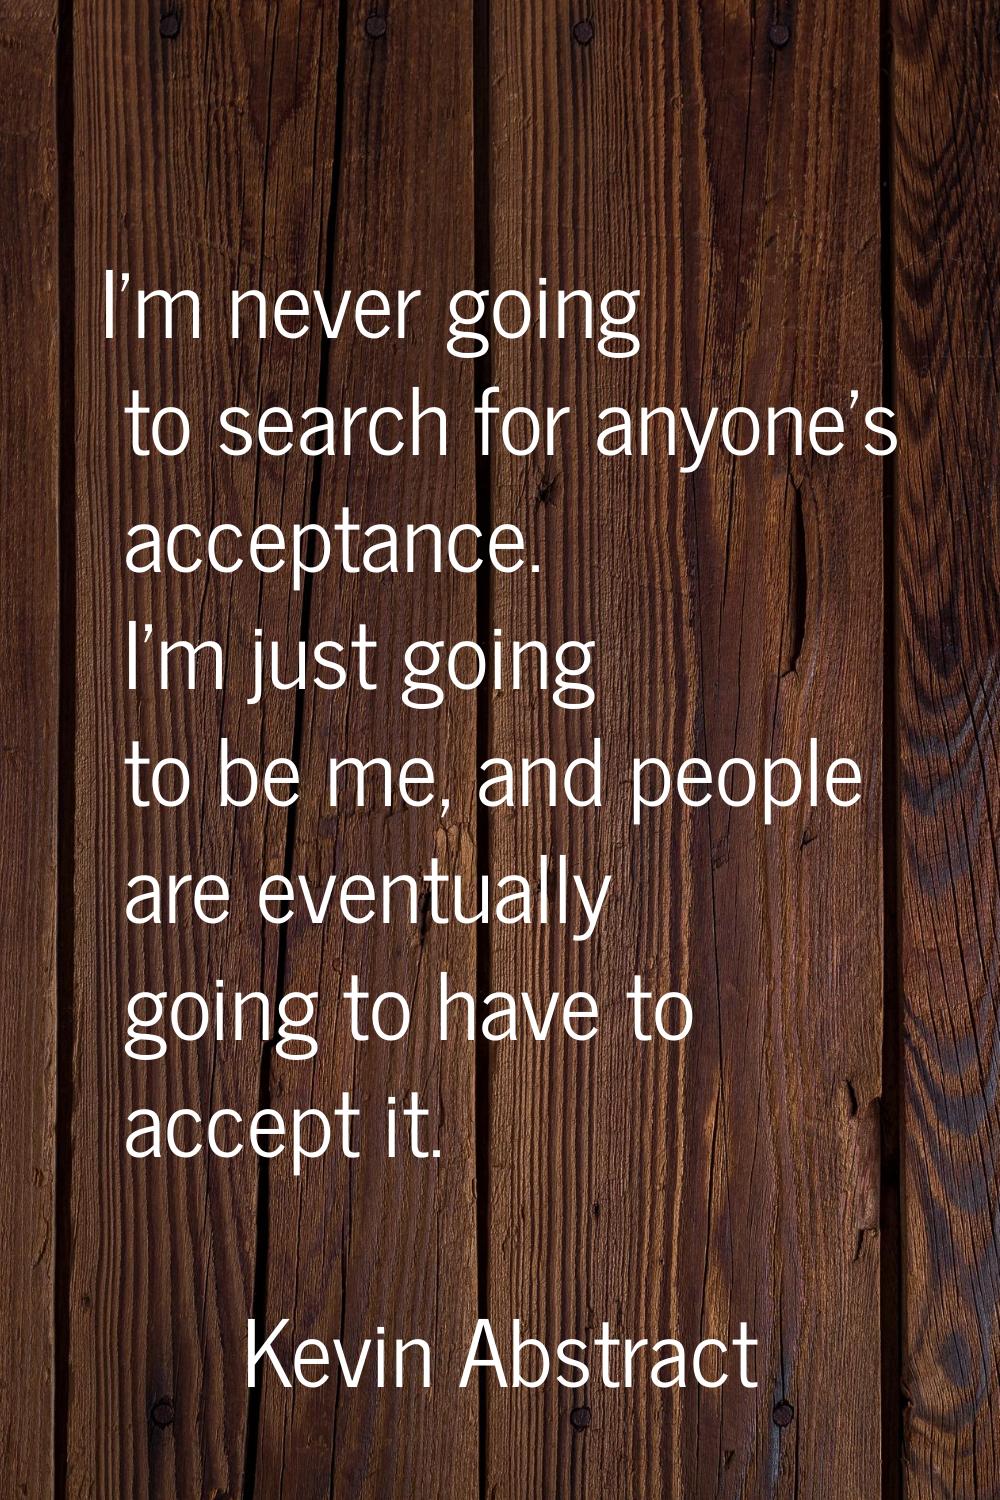 I'm never going to search for anyone's acceptance. I'm just going to be me, and people are eventual